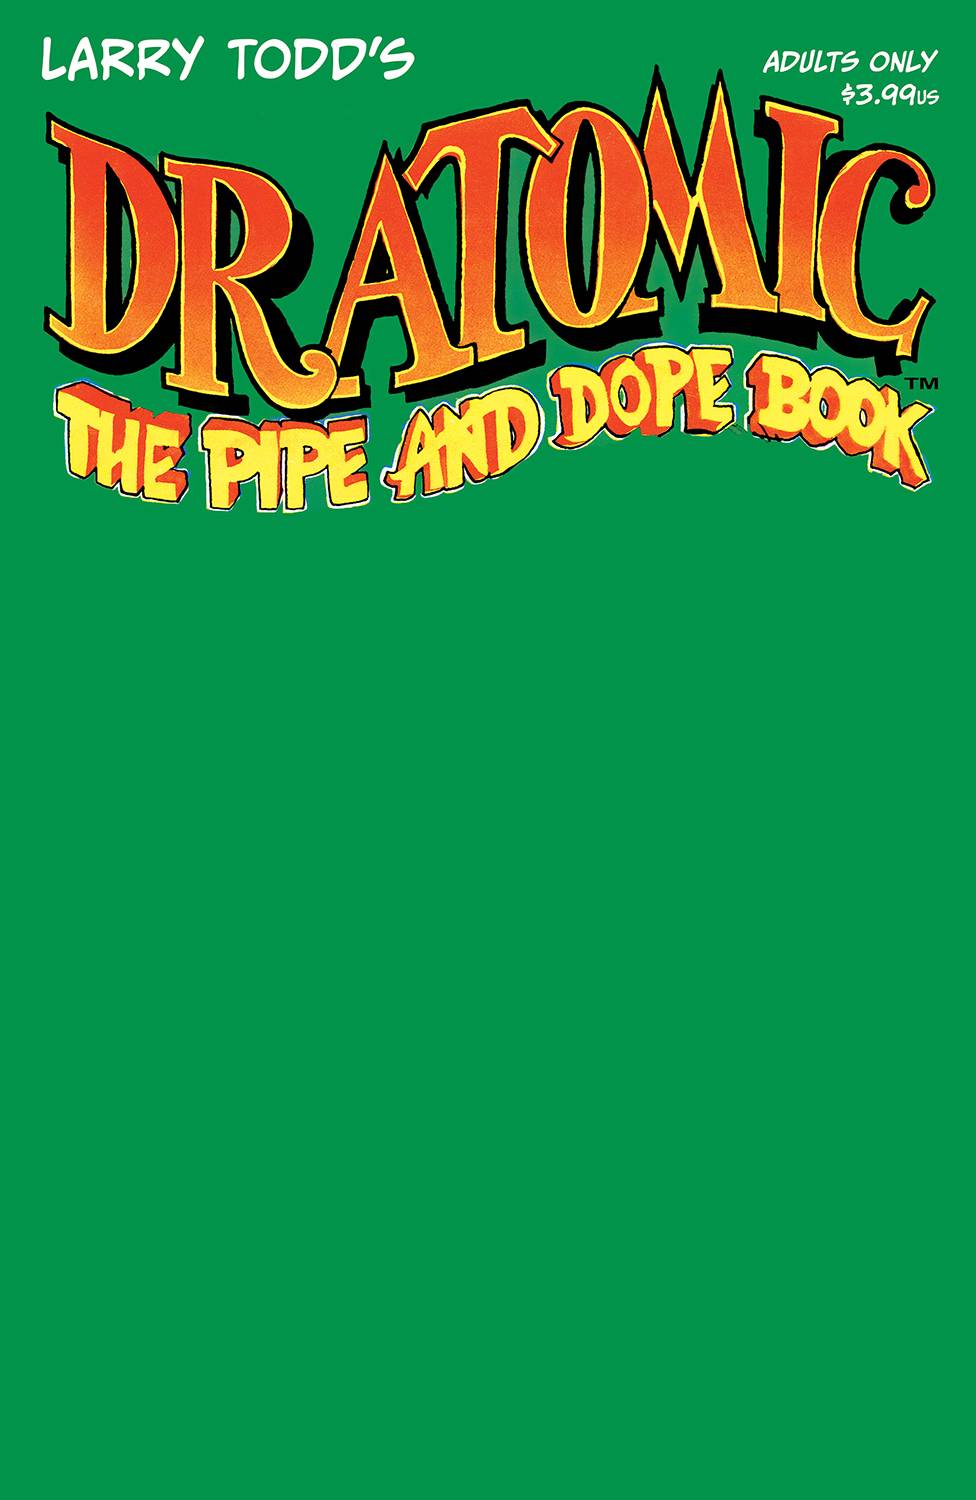 Dr. Atomic The Pipe and Dope Book One Shot